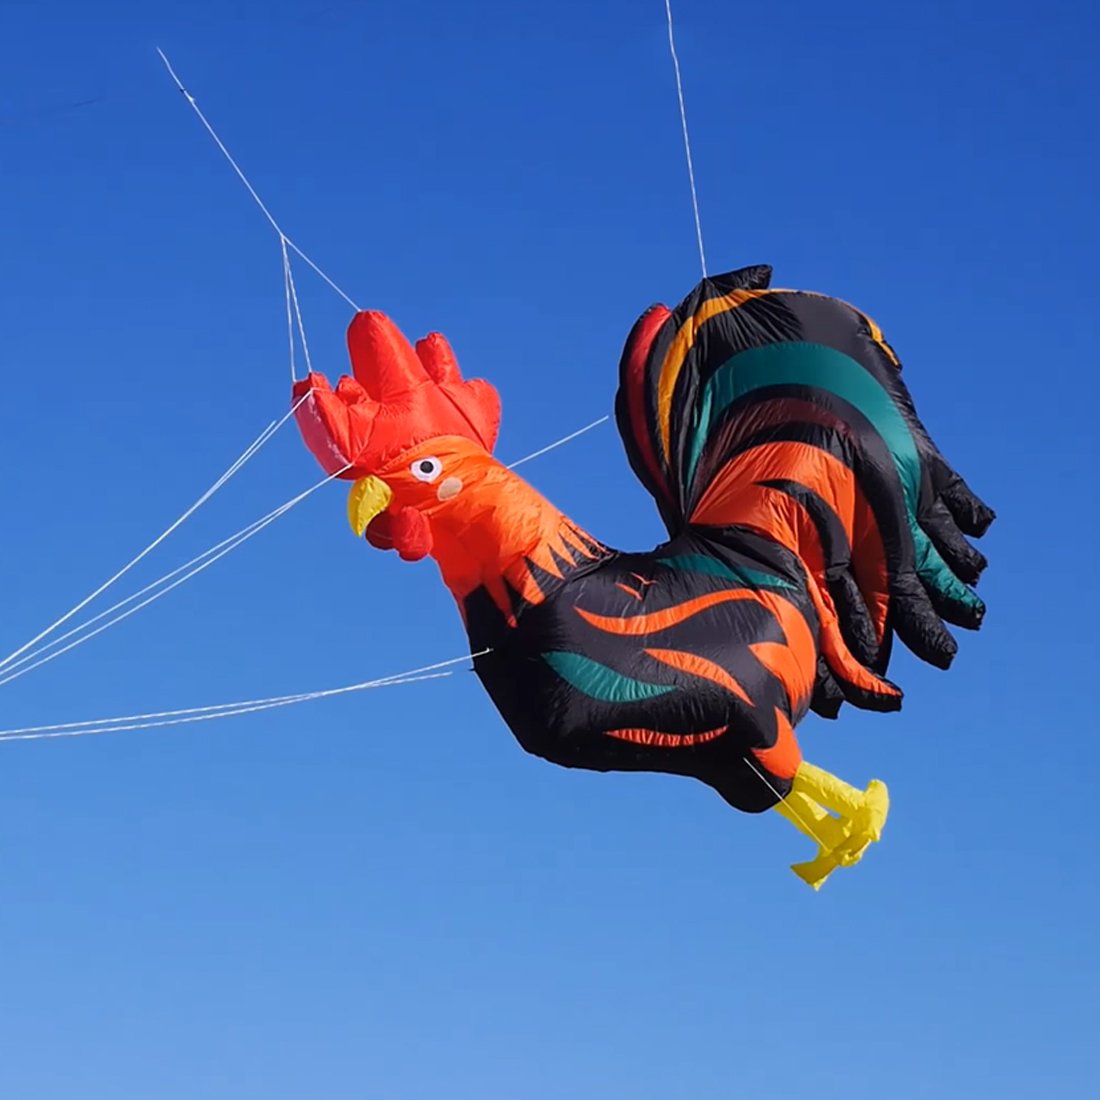 9KM 2.8m*2.5m Rooster Kite Line Laundry Pendant Soft Inflatable Show Kite for Kite Festival 30D Ripstop Nylon with Bag